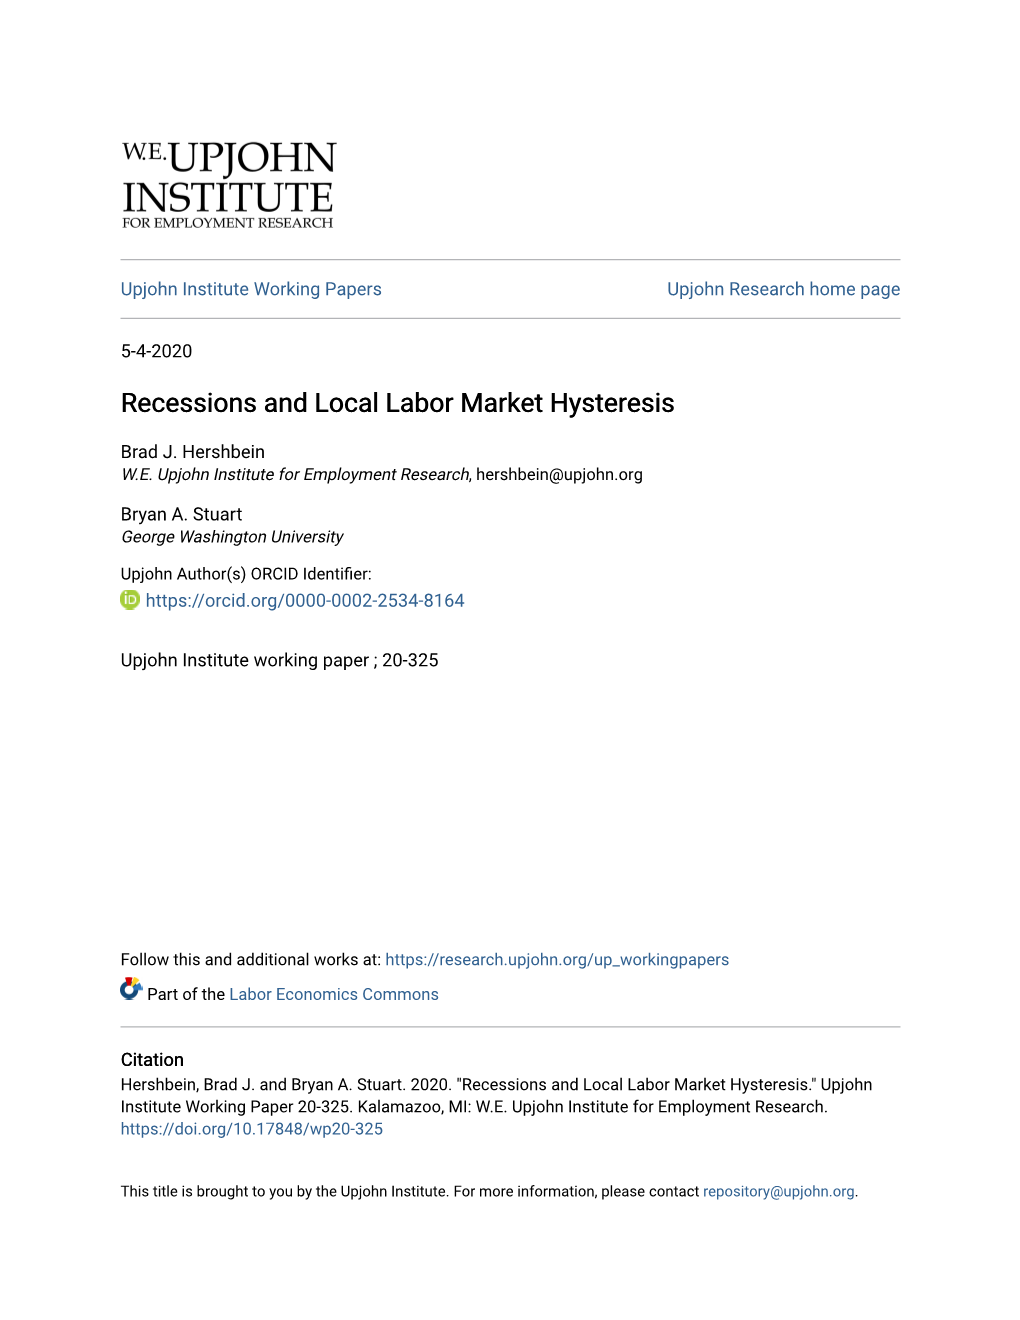 Recessions and Local Labor Market Hysteresis